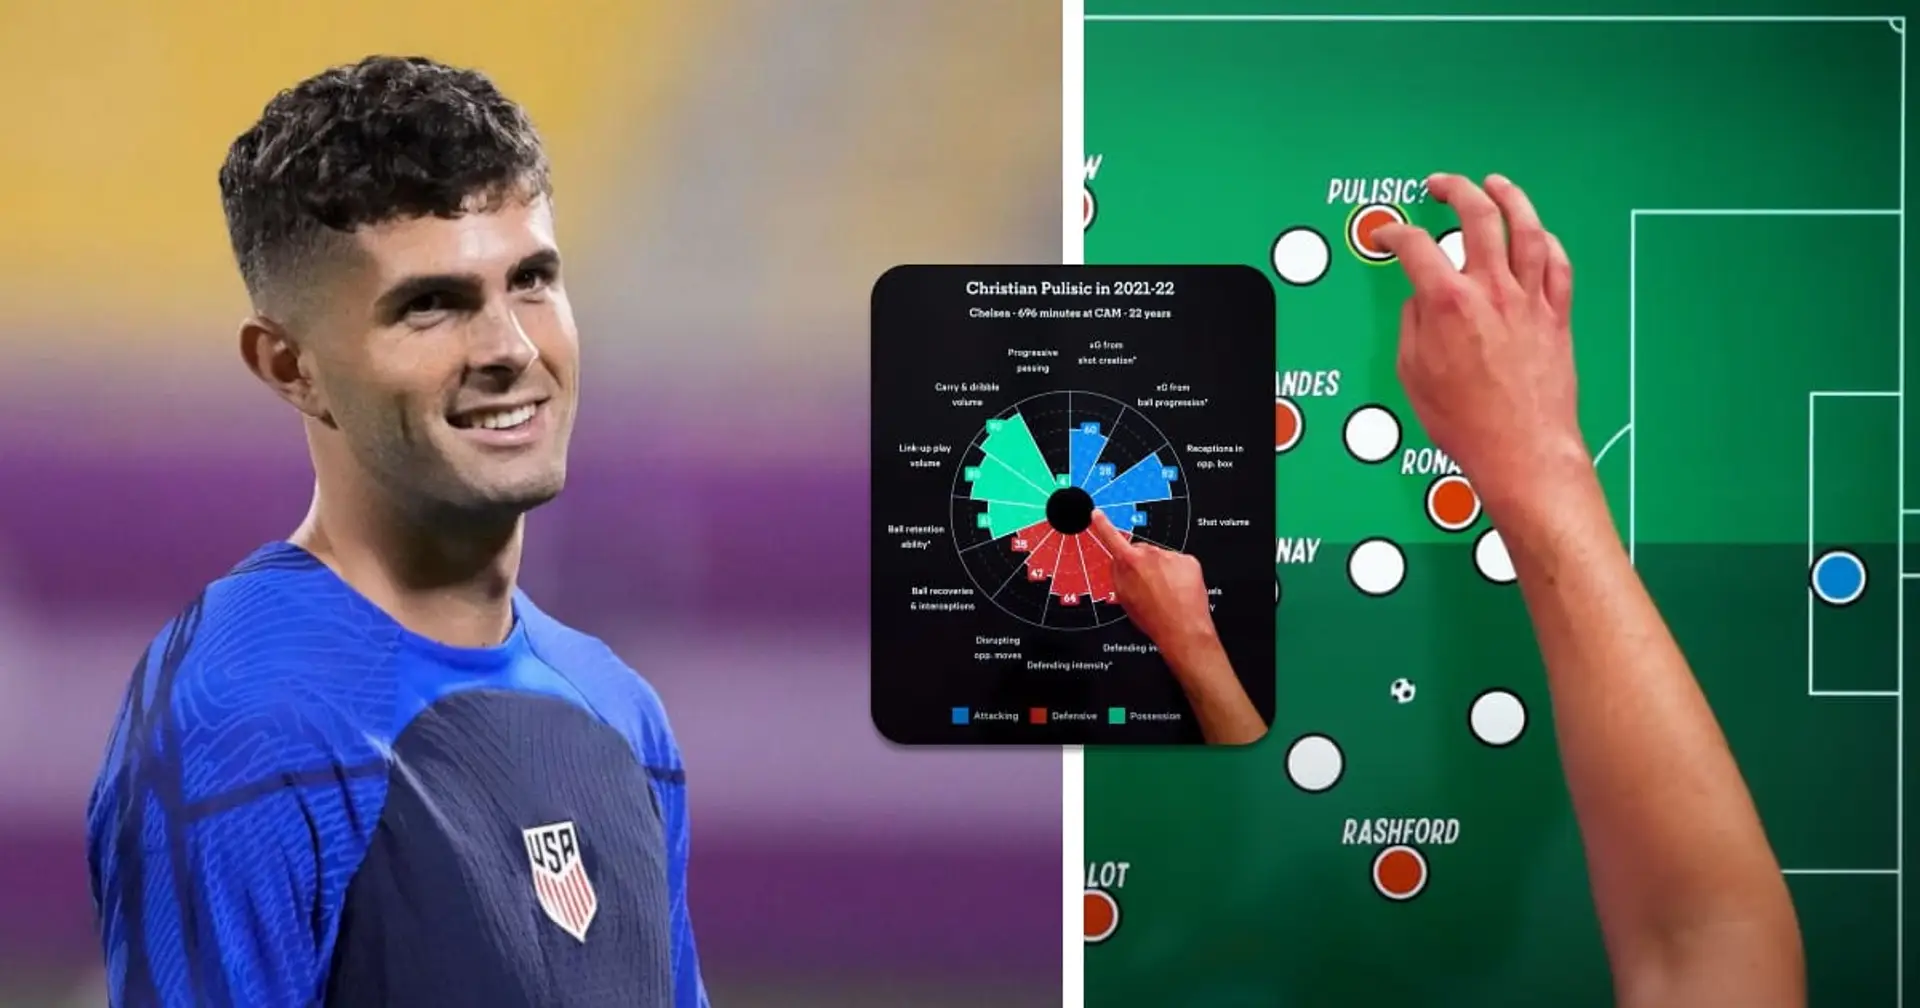 Tactical analyst explains why Christian Pulisic to Man United on loan could make a lot of sense